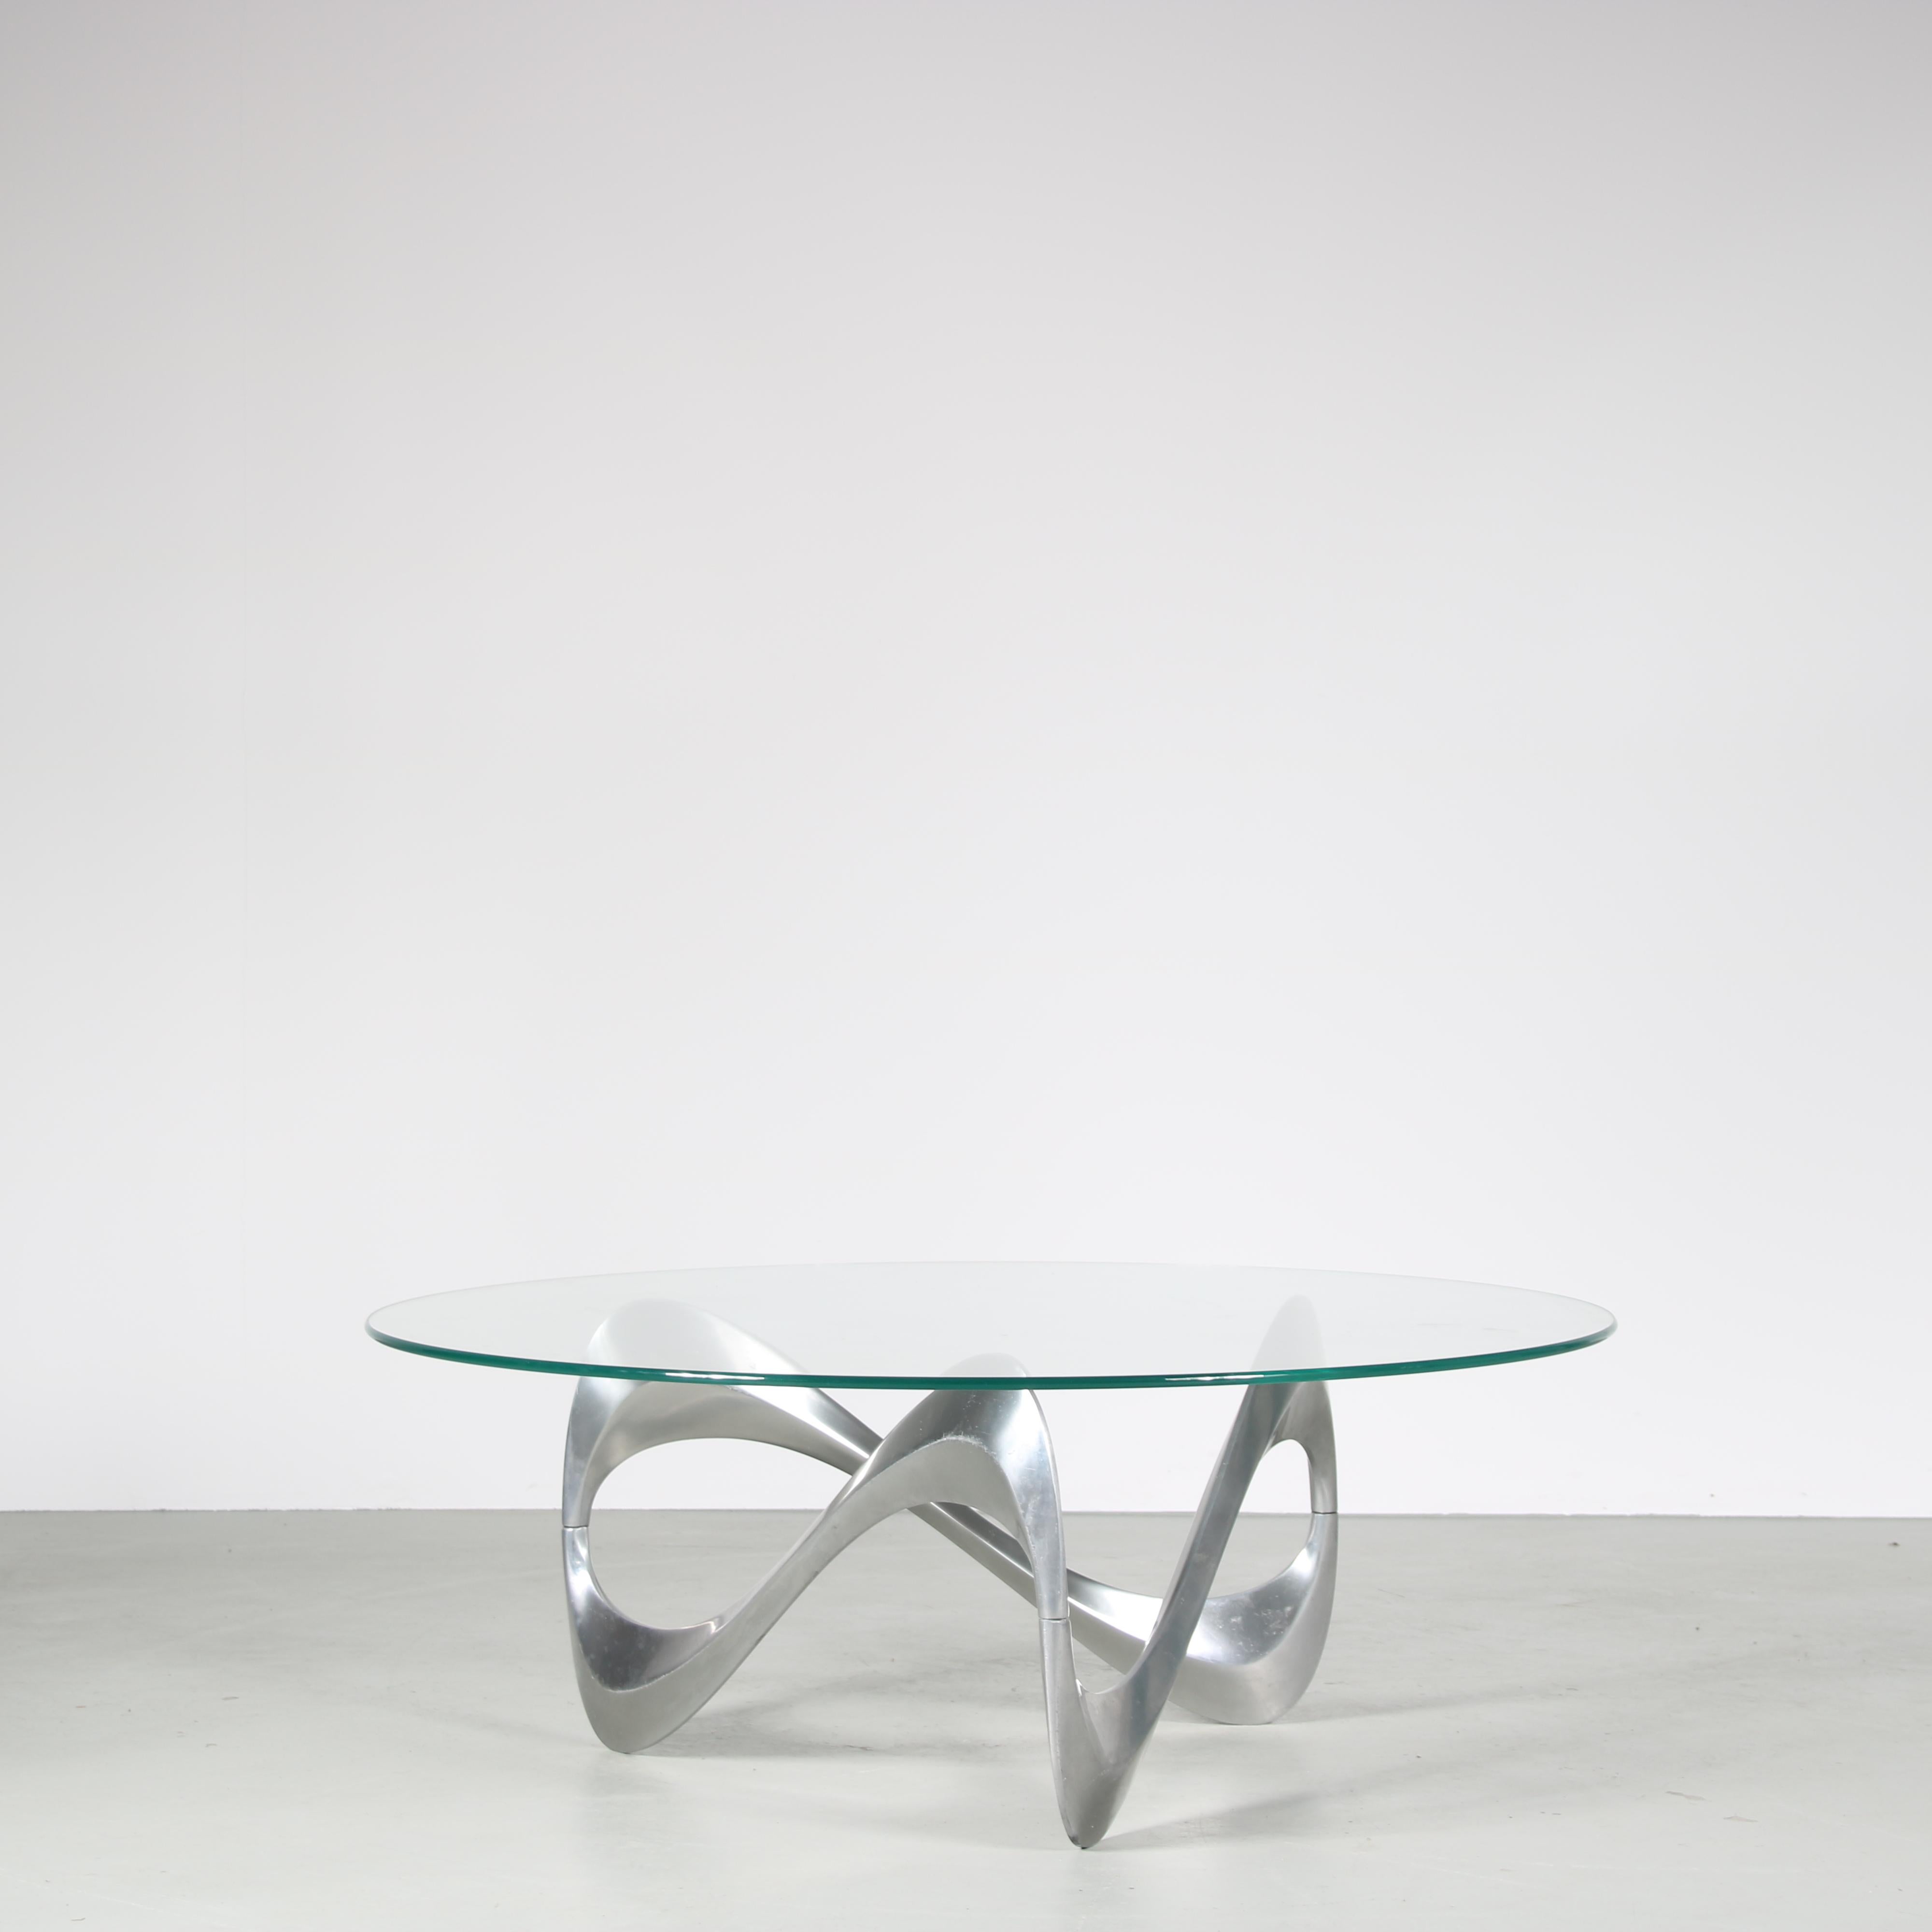 An iconic “Snake” coffee table, designed by Knut Hesterberg and manufactured by Ronald Schimdt in Germany around 1970.

This eye-catching table has an aluminium base, in eye-catching waved shape which it owes it’s name to. The round, clear glass